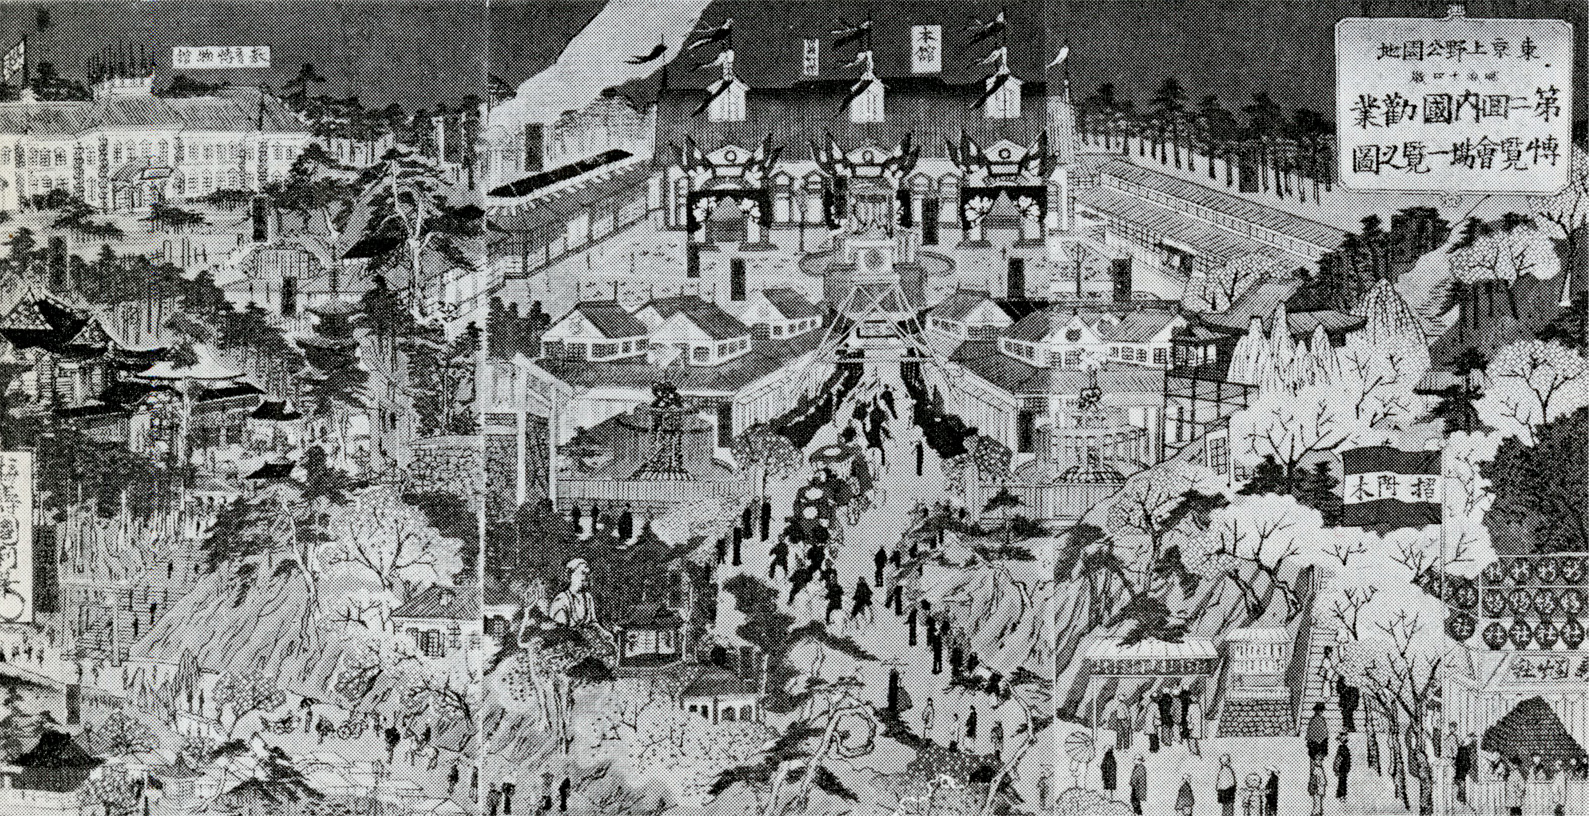 The Second National Industrial Exhibition (from the collection of Heijiro Hoshino)